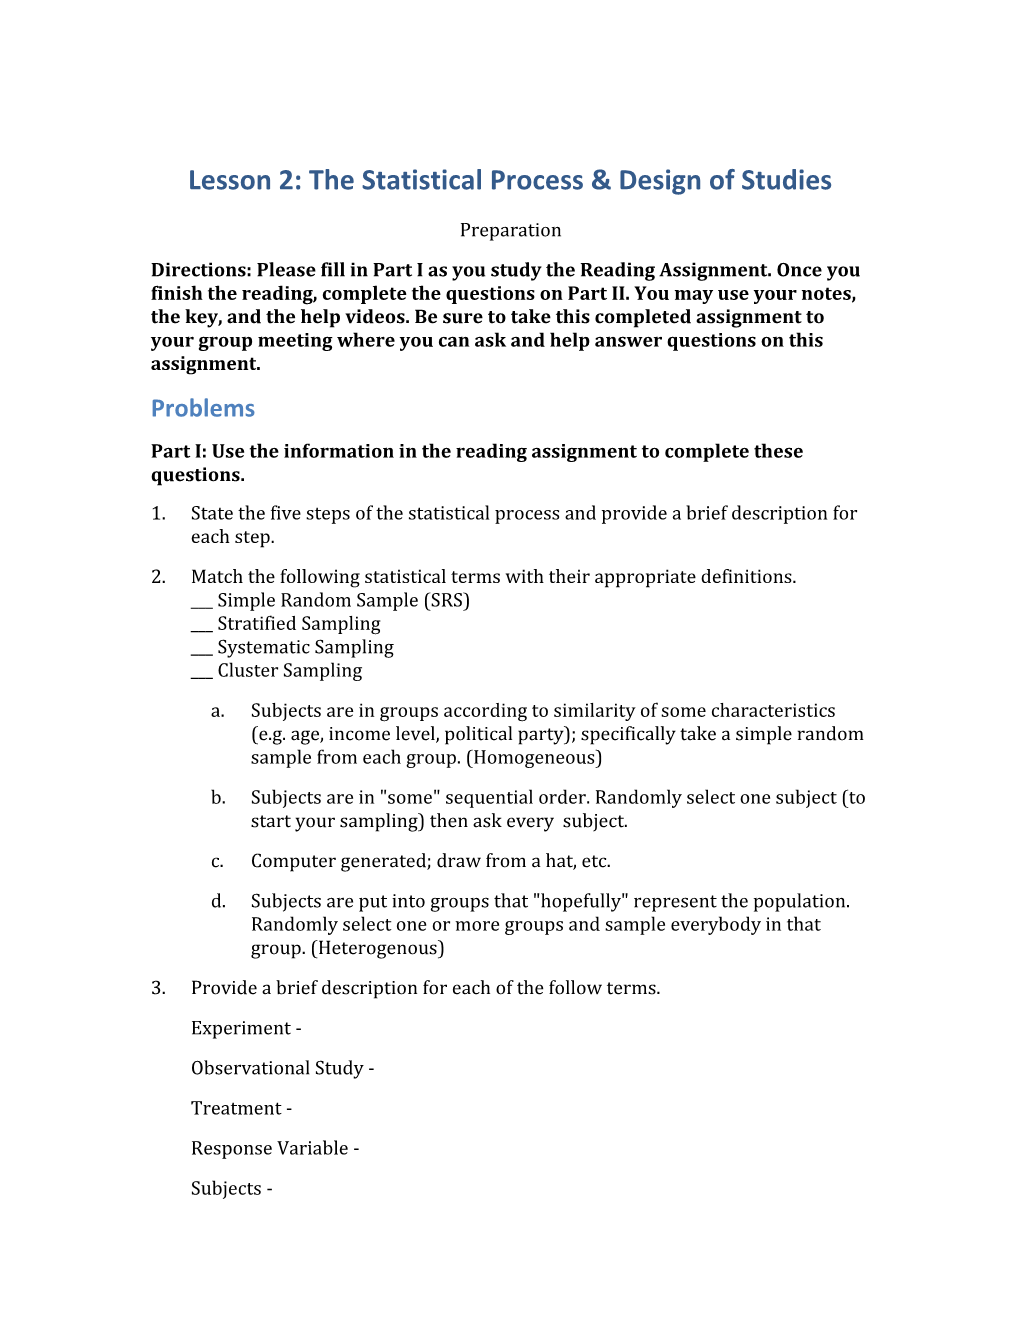 Lesson 2: the Statistical Process & Design of Studies